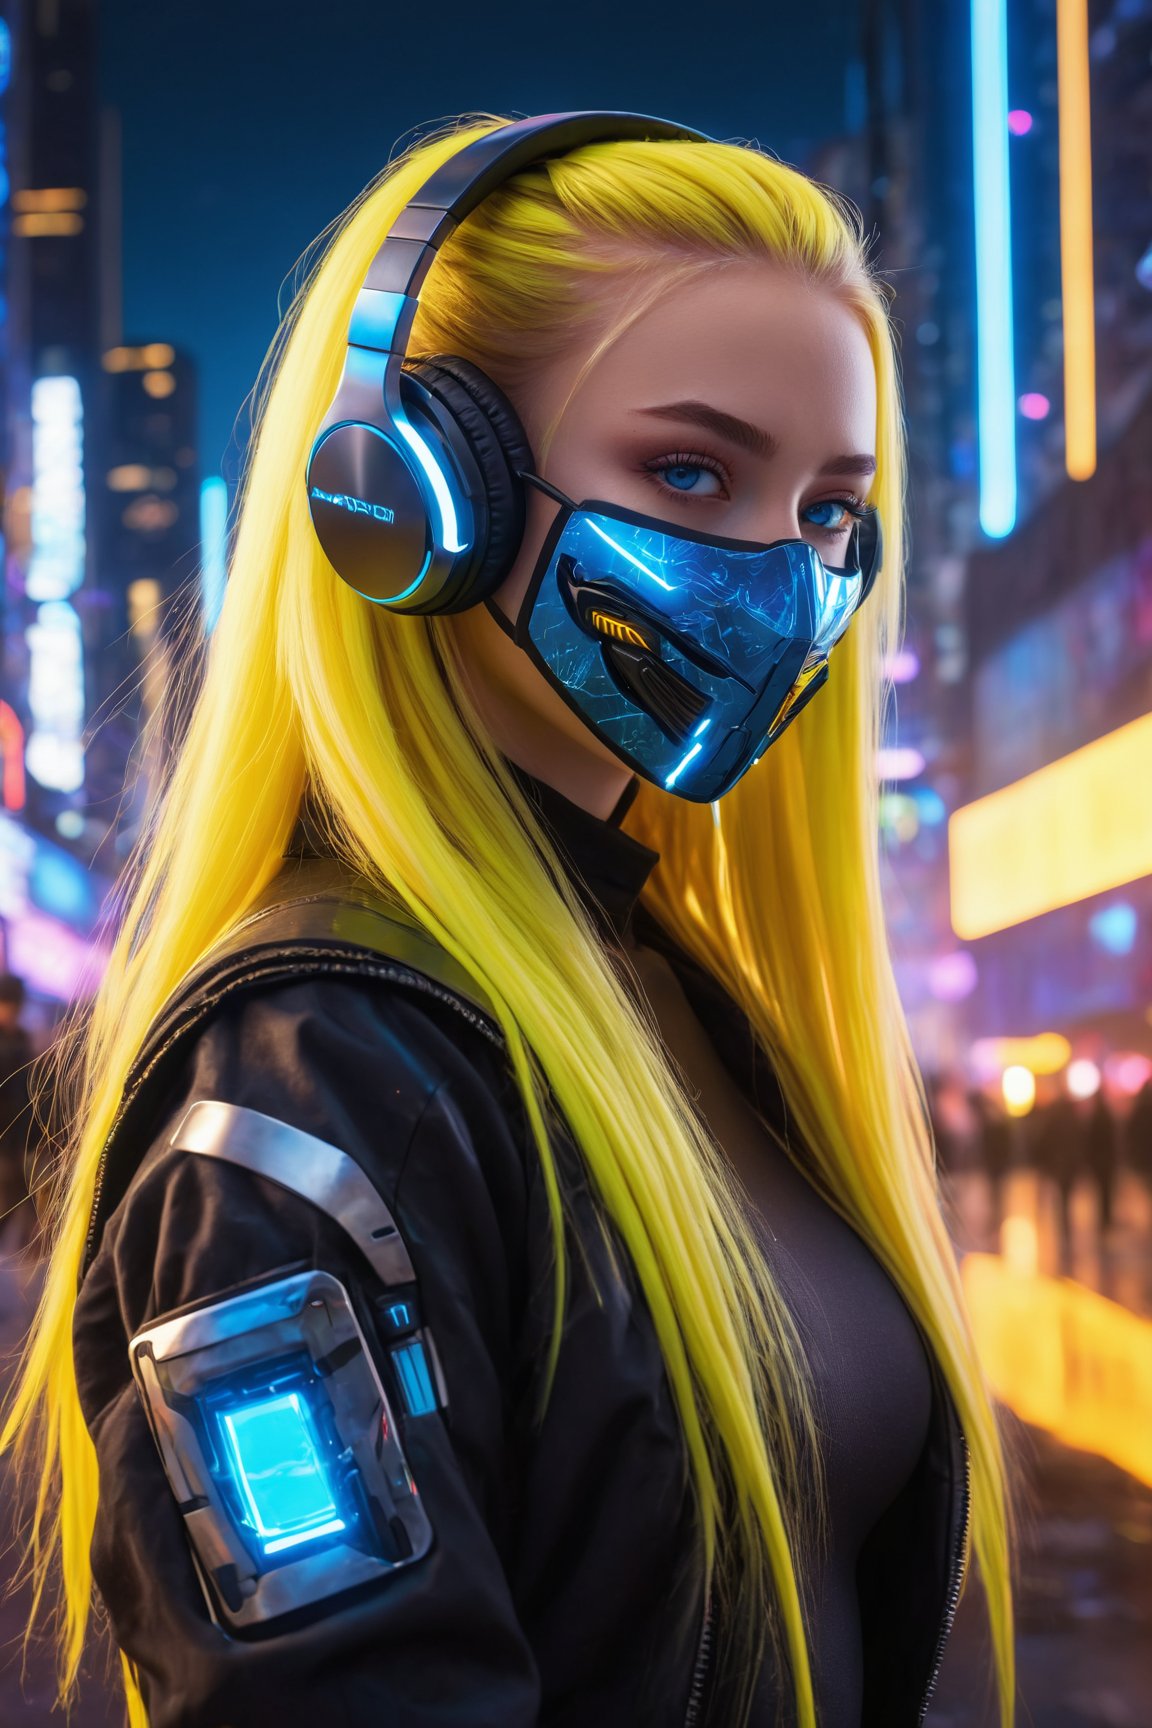 (best quality,4k,8k,highres,masterpiece:1.2),ultra-detailed,1girl,long yellow hair,blue eyes,futuristic vibes,mask,headphones,glowing eyes,neon lights,cyberpunk style,colorful cityscape:animated,high-tech gadgets,reflective surfaces,shiny metallic accessories,holographic displays,urban setting:1.1,vibrant colors,edgy atmosphere,sci-fi fashion,urban ninja,cool pose,urban nightlife,street art graffiti:spray painted everywhere,light trails,nighttime ambiance:1.1,futuristic architecture,technological advancements,advanced transportation systems,enhanced vision,confidence,attitude:1.1